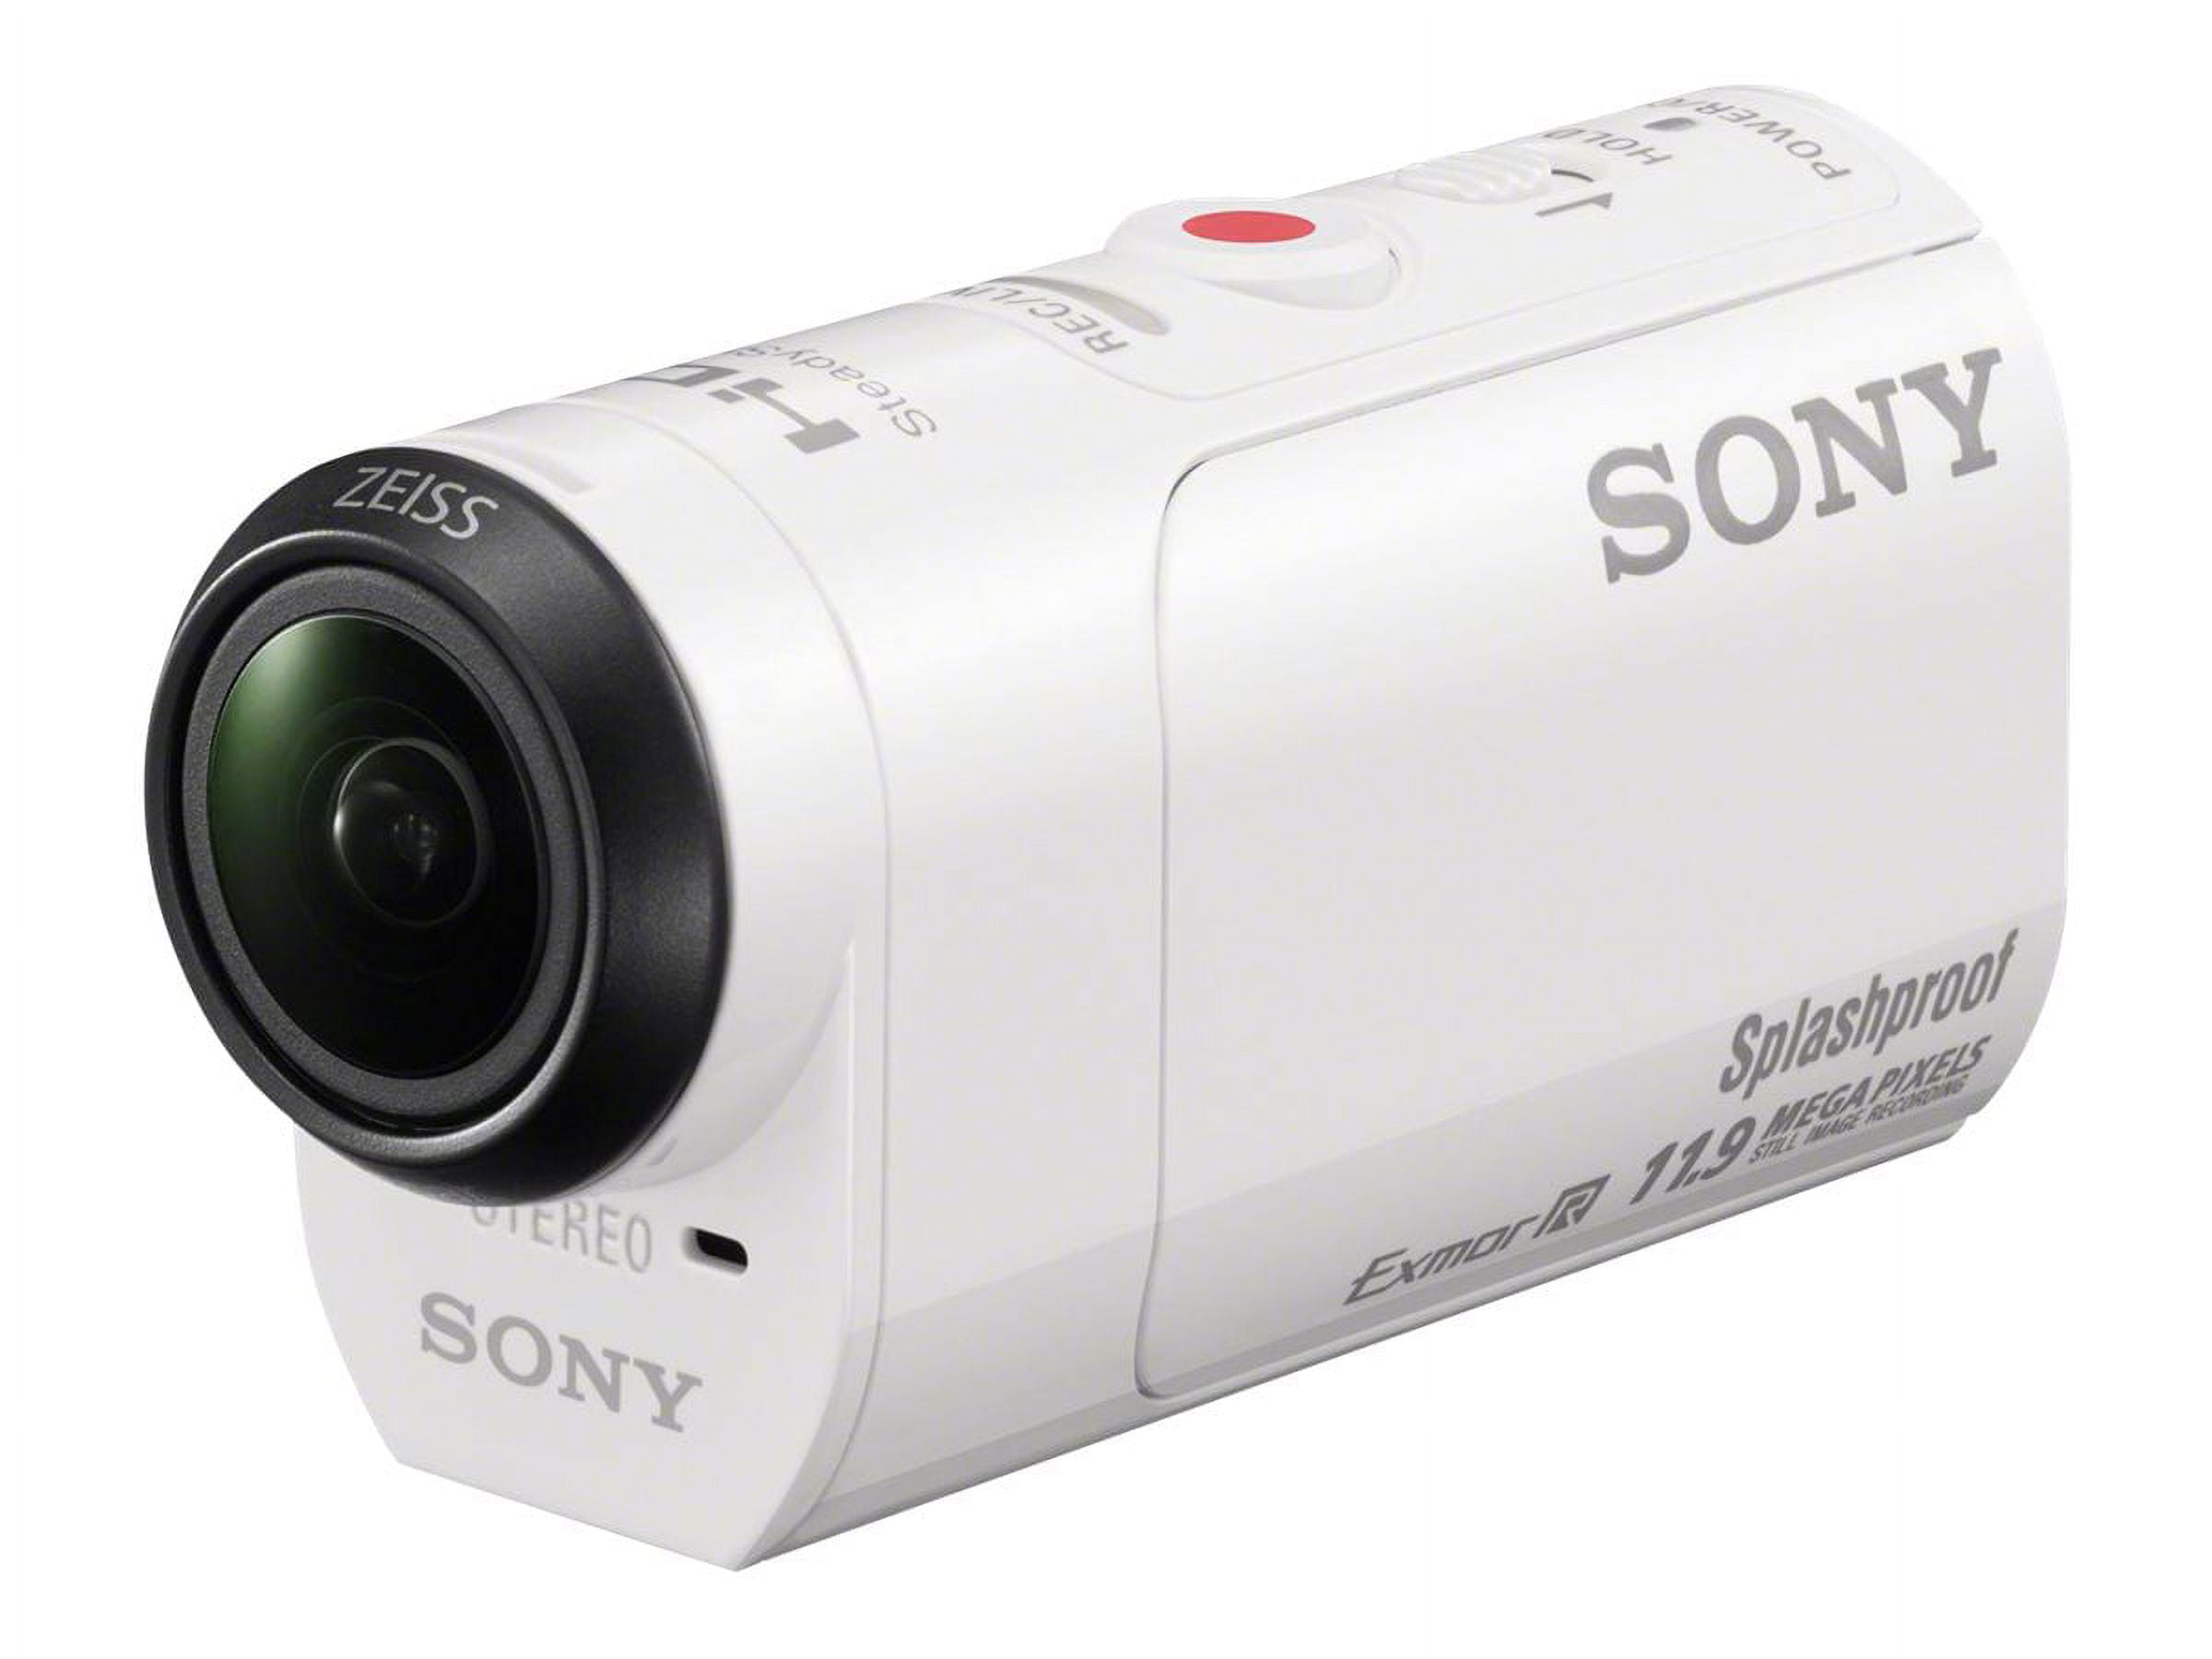 Sony Action Cam Mini HDR-AZ1 - Action camera - 1080p - 16.8 MP - Carl Zeiss  - Wi-Fi, NFC - underwater up to 9.8 ft - white